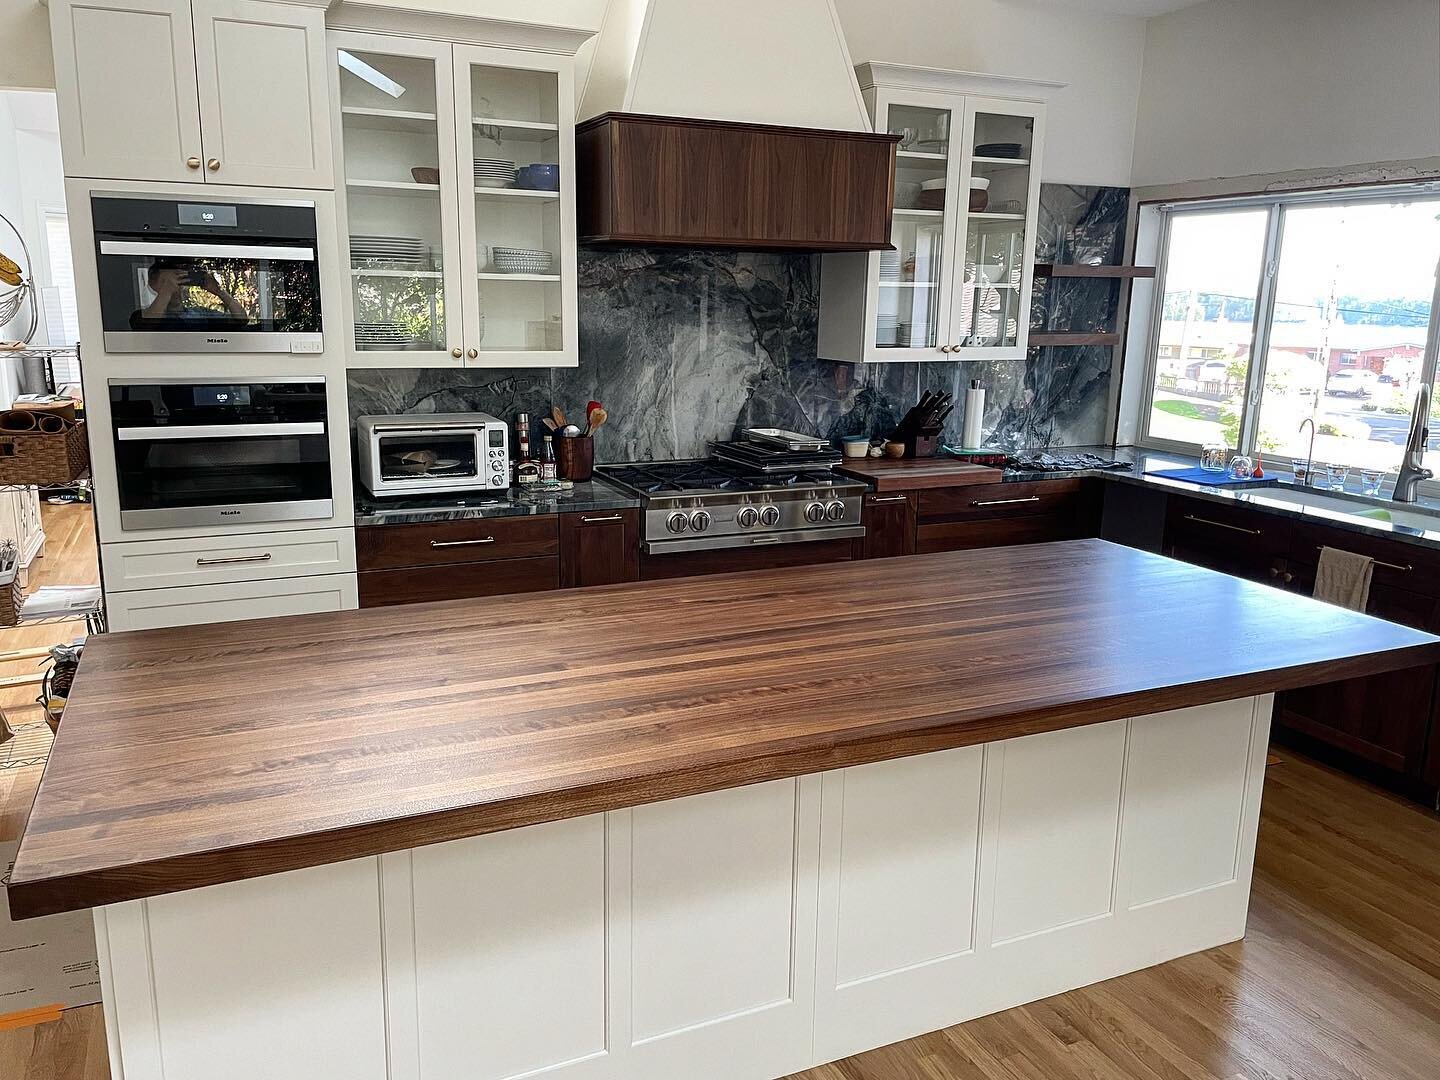 And there&rsquo;s that! One massive solid walnut island top for some awesome clients and their new kitchen. Finished with @waterlox  and @bidwellwoodandiron hardware.
⠀⠀⠀⠀⠀⠀⠀⠀⠀⠀⠀
#woodworking #finewoodworking #furnituremaker #madeinoregon #madeinport